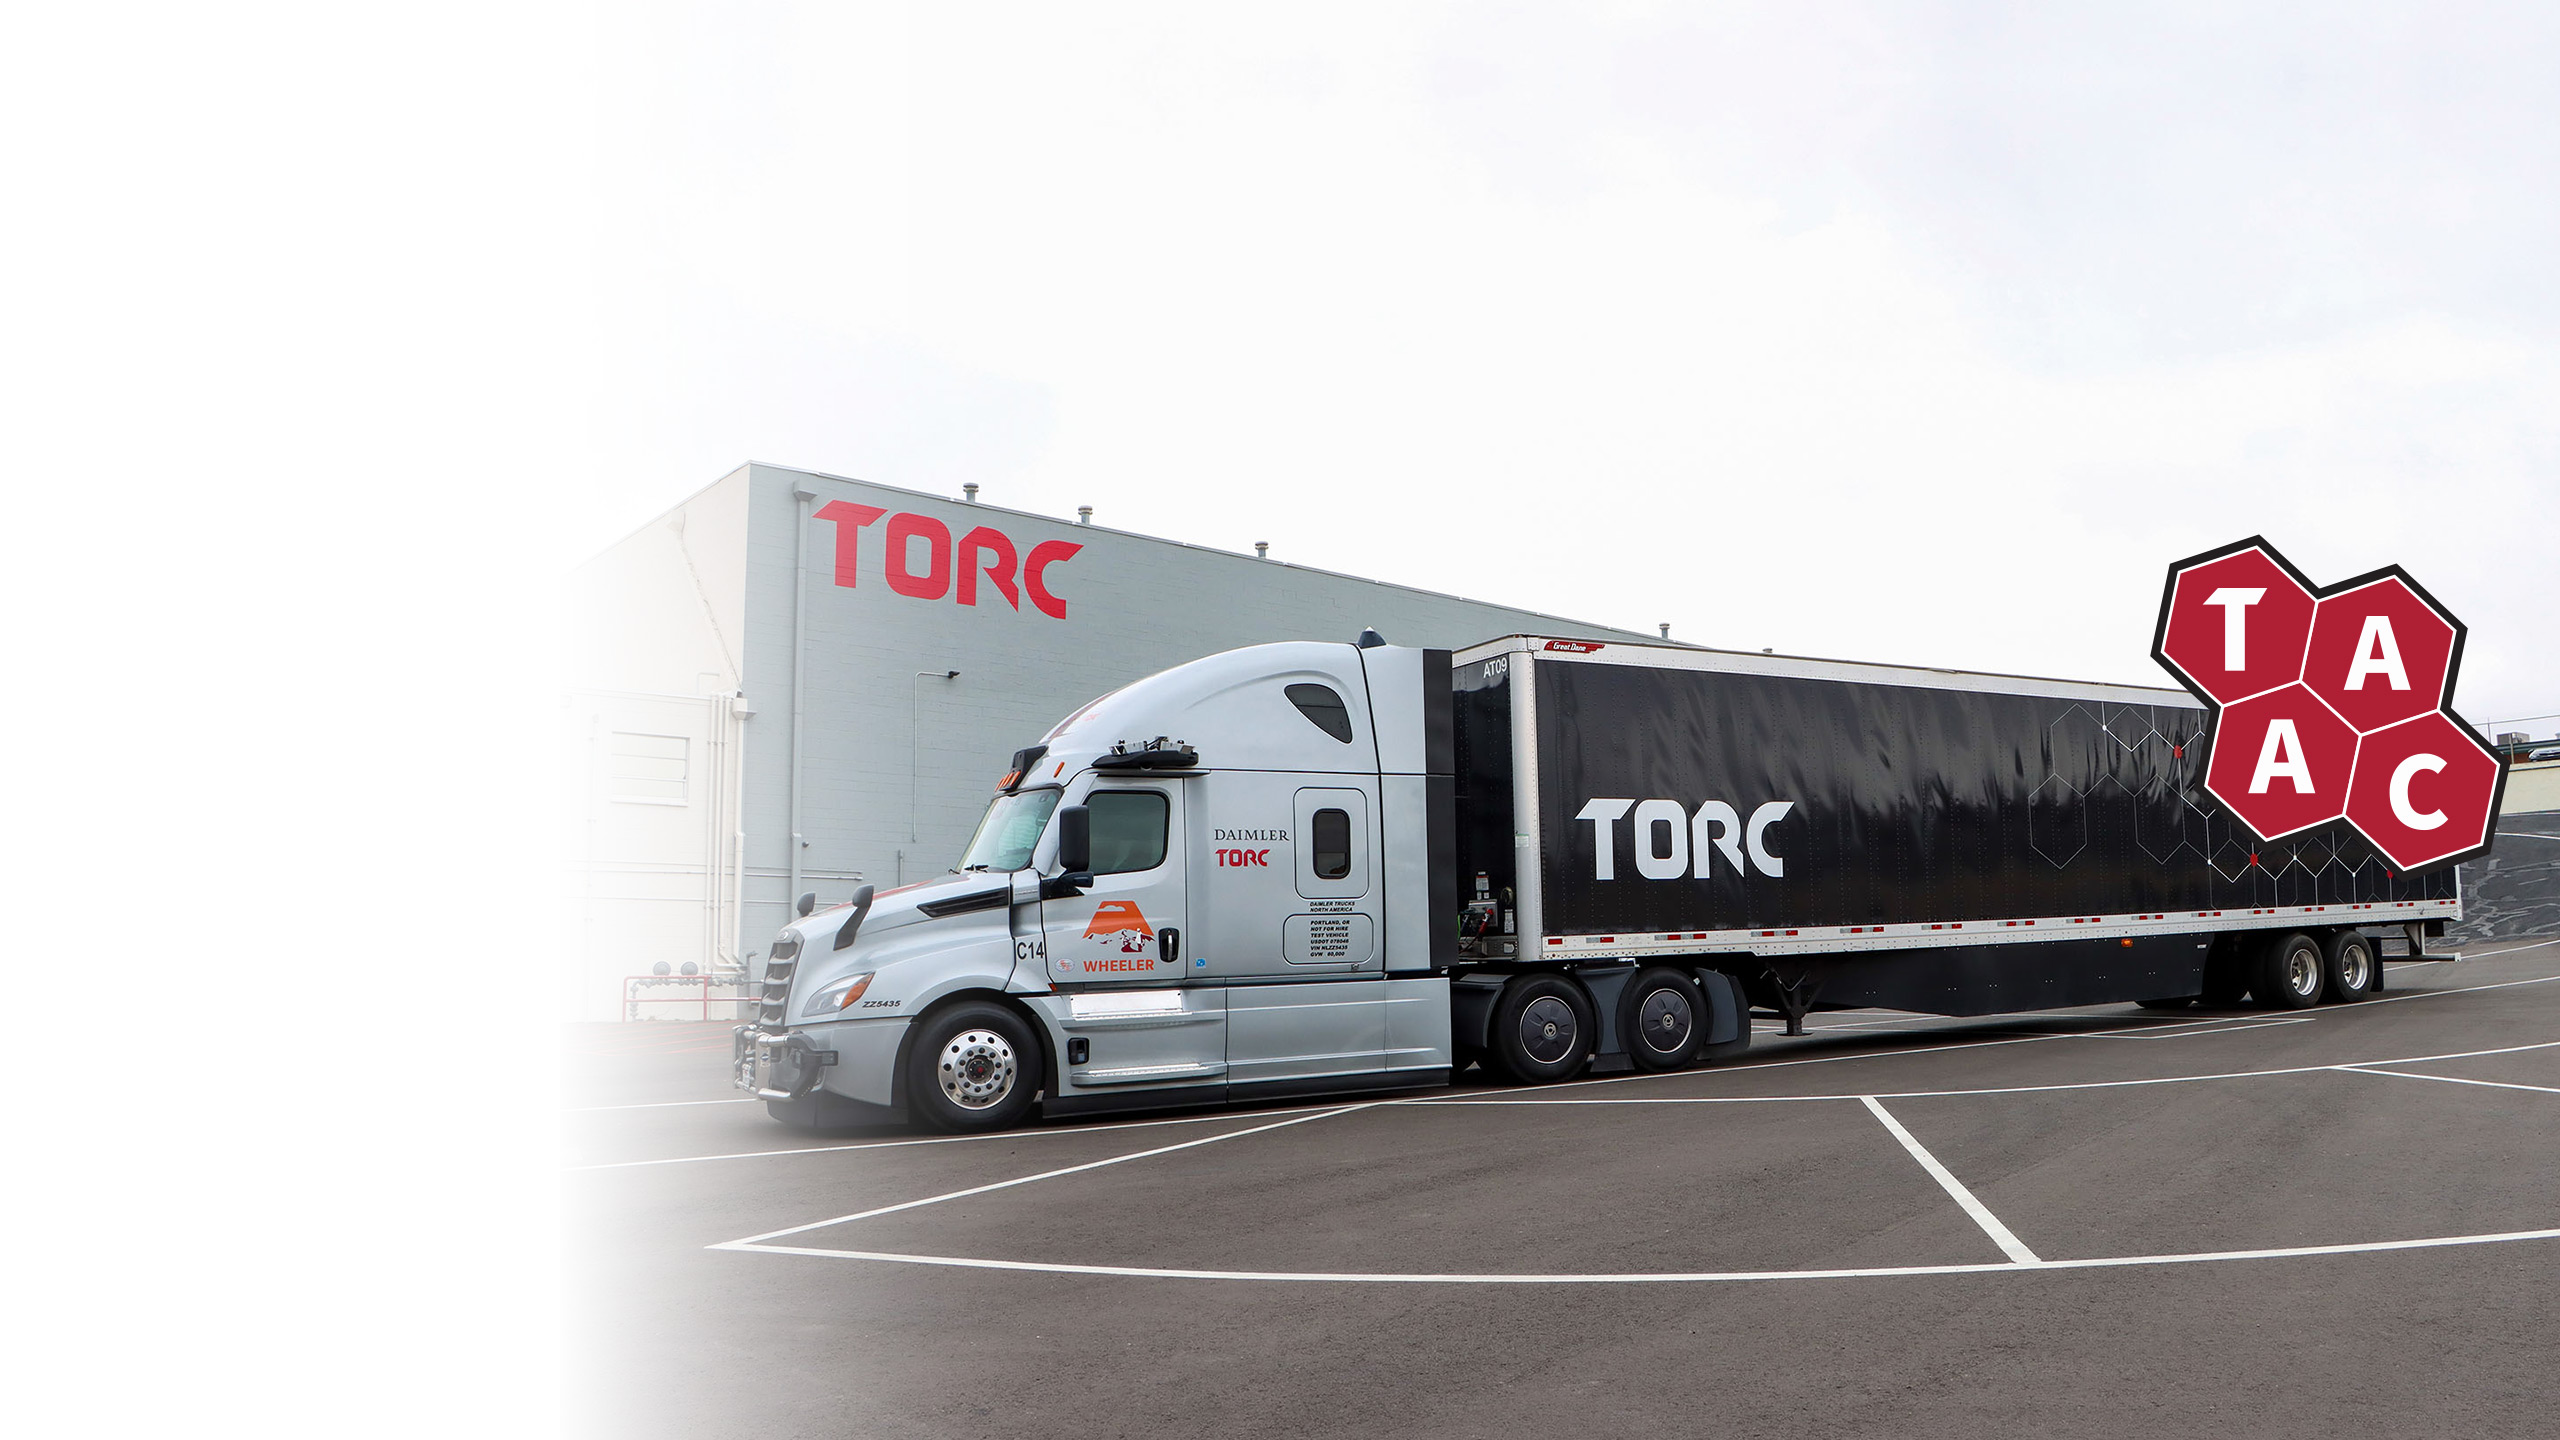 TAAC logo on image of Torc truck